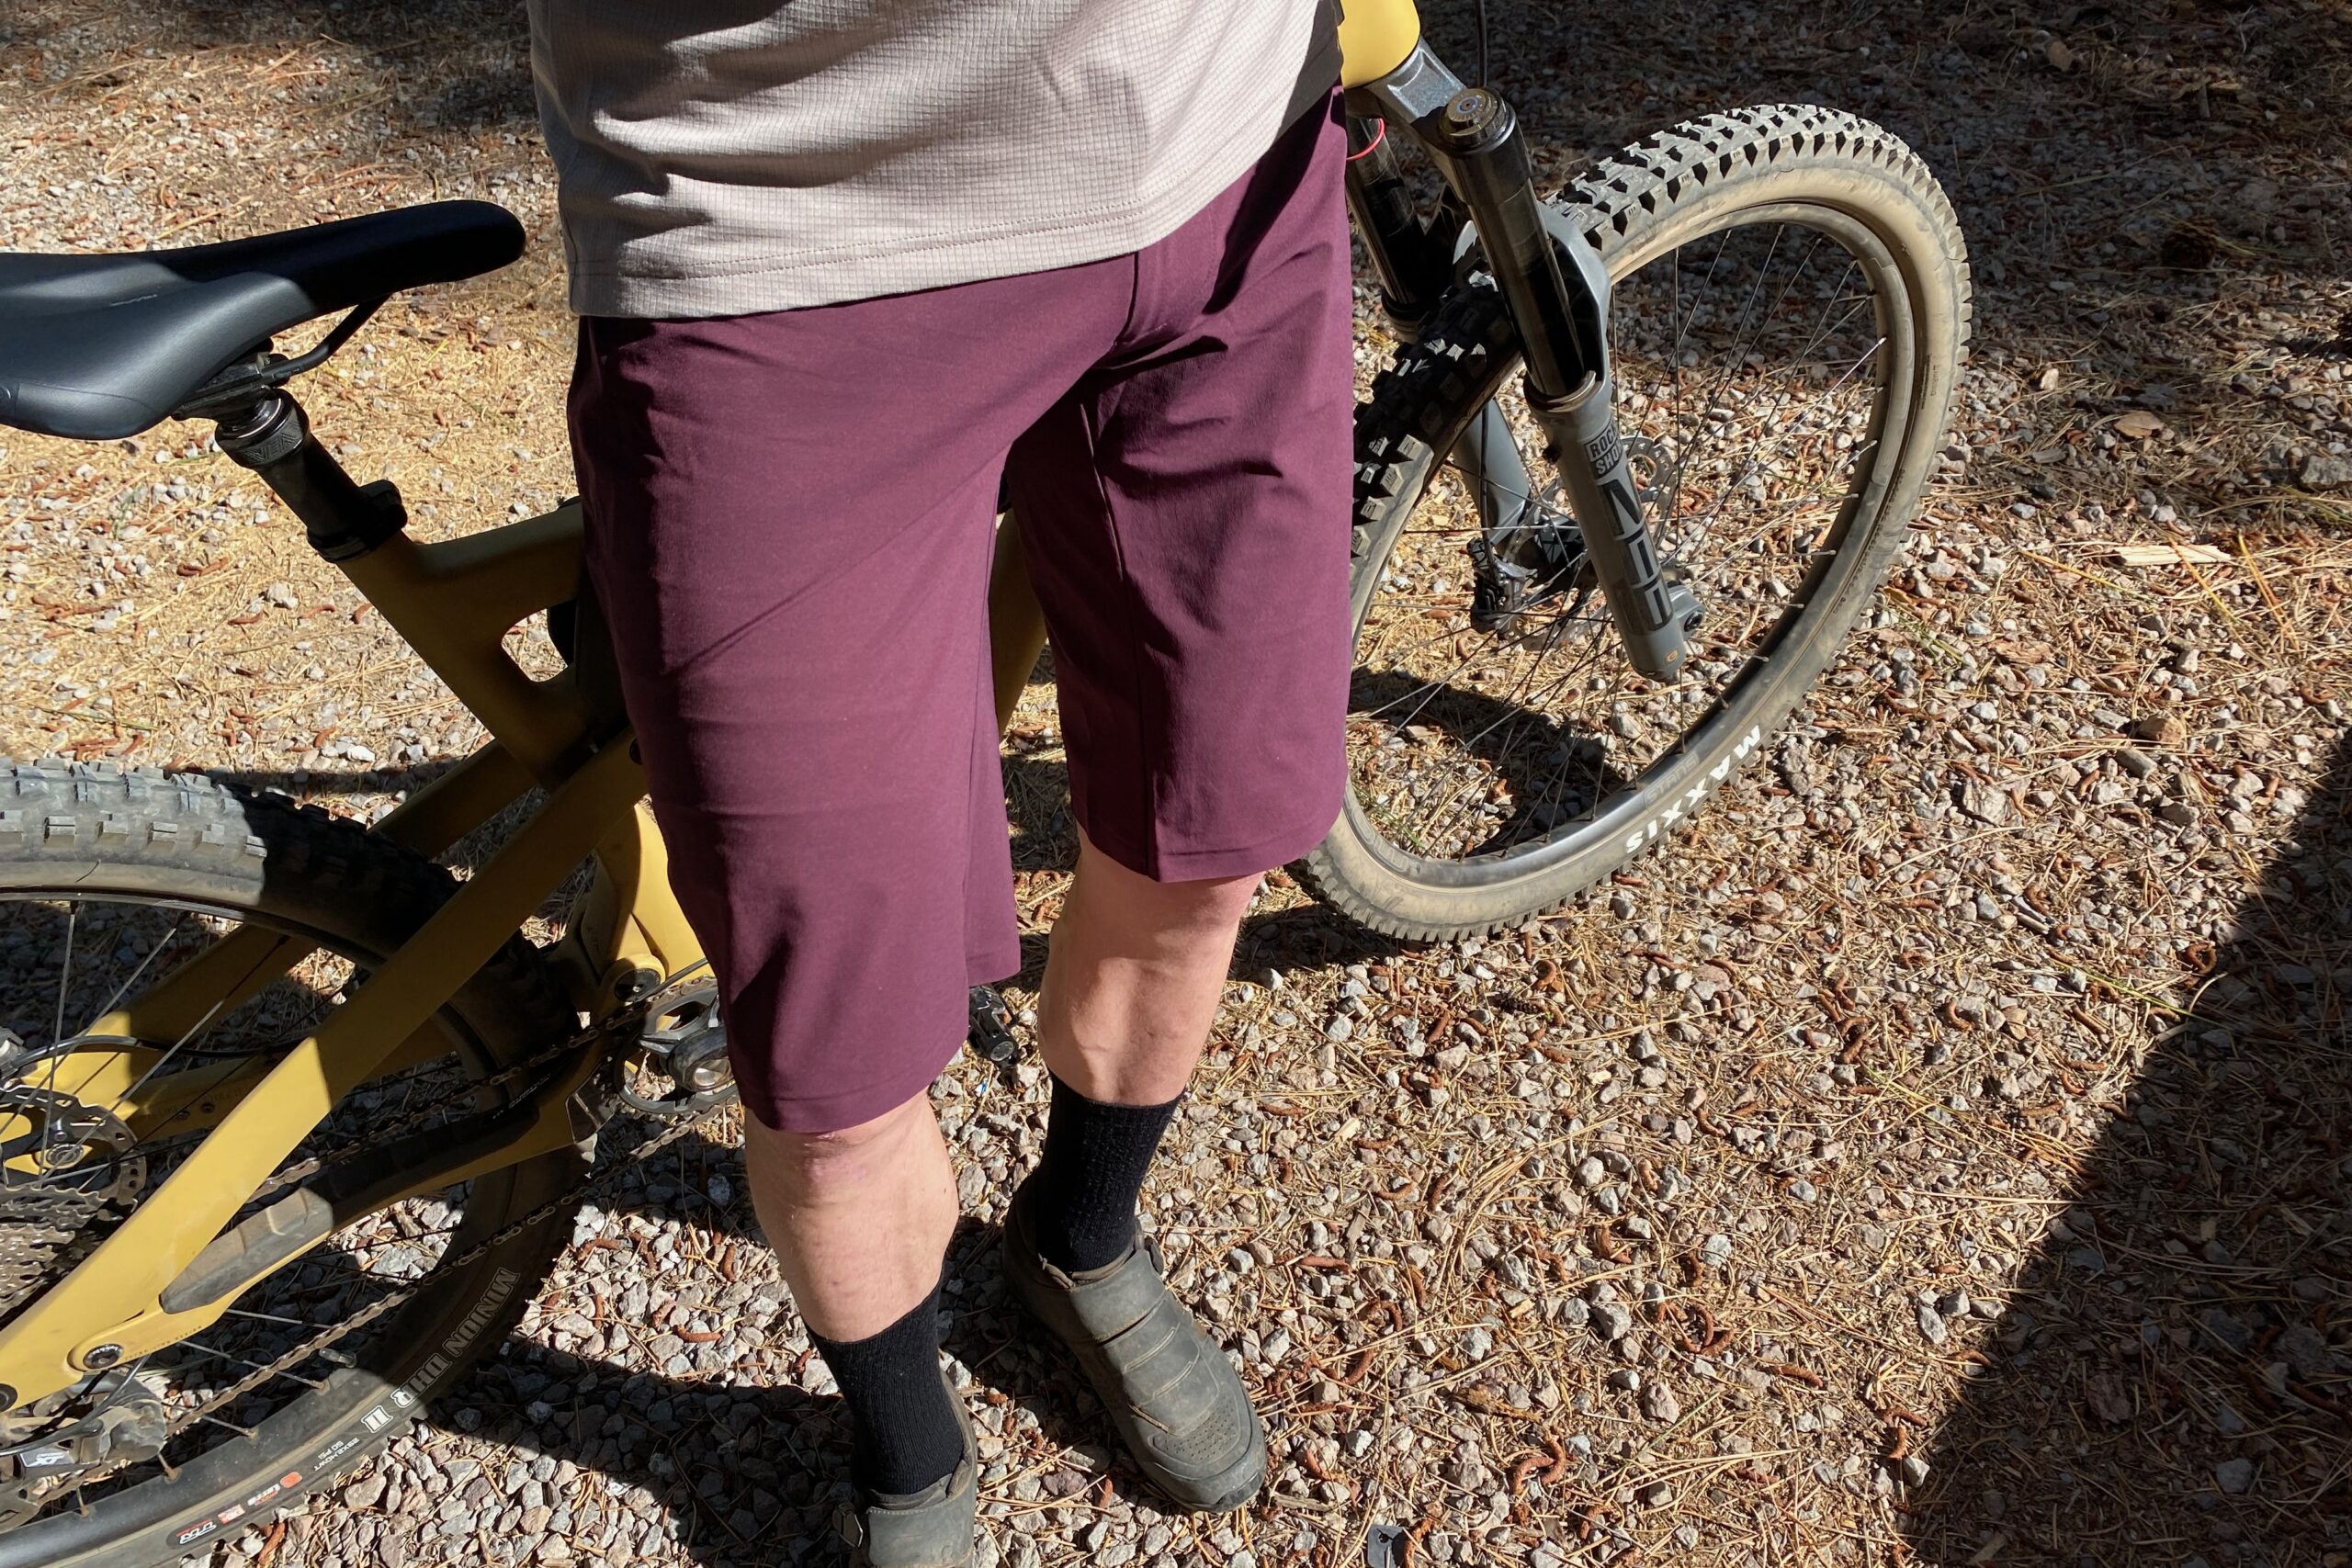 Wearing the Velocio Ultralight Trail Shorts and Delta Jersey